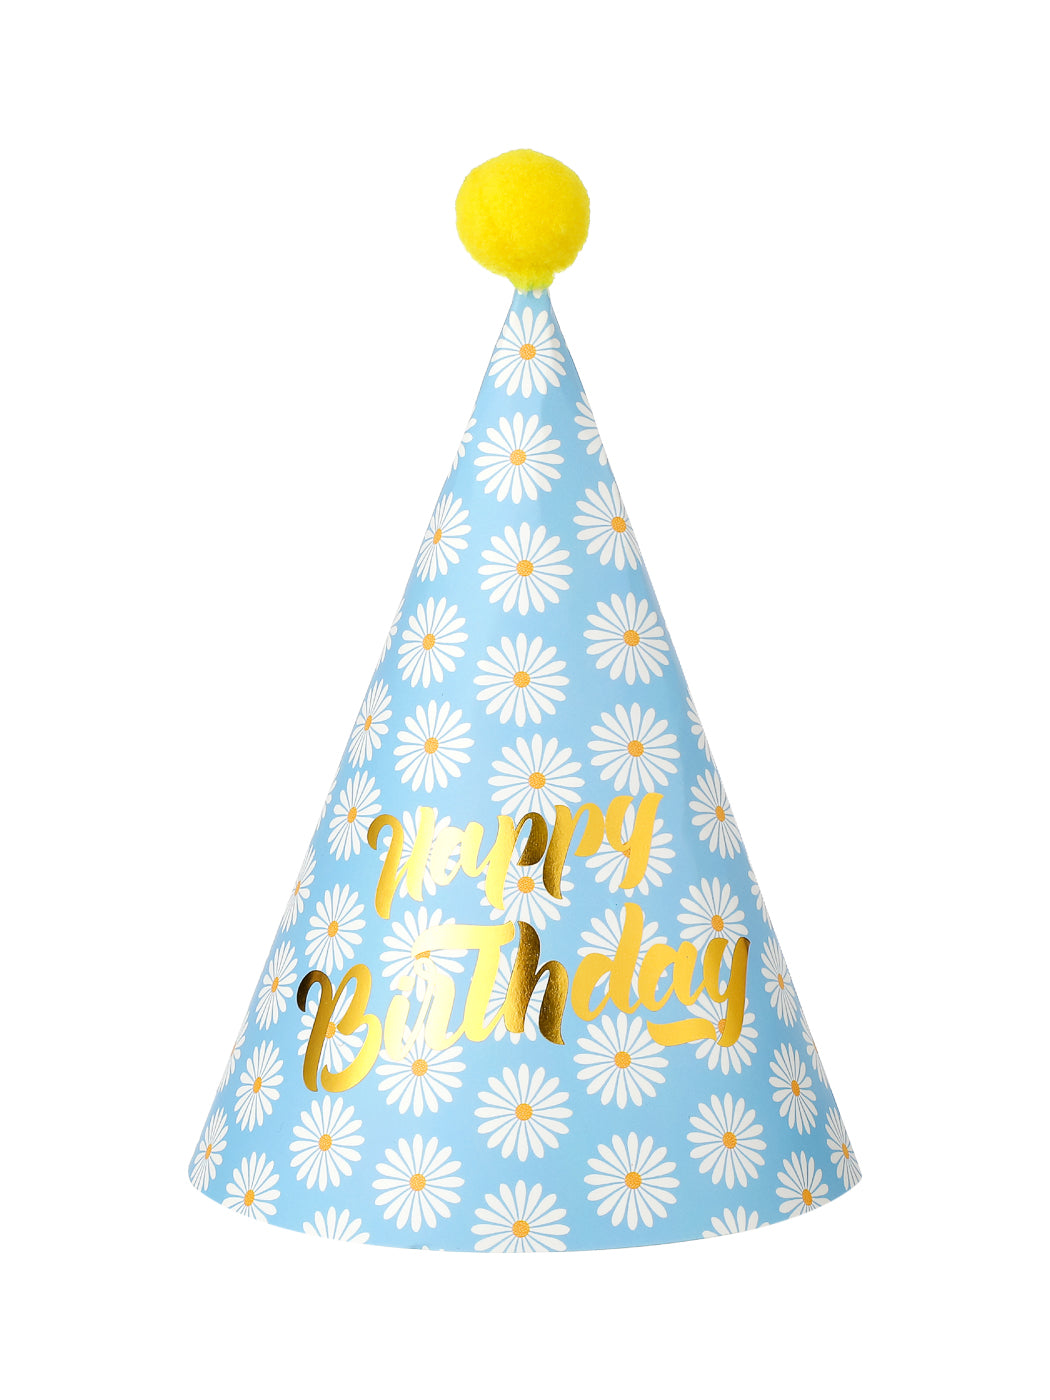 MINISO BIRTHDAY PARTY HAT(BLUE, DAISY) 2010879912104 PARTY DECORATIONS